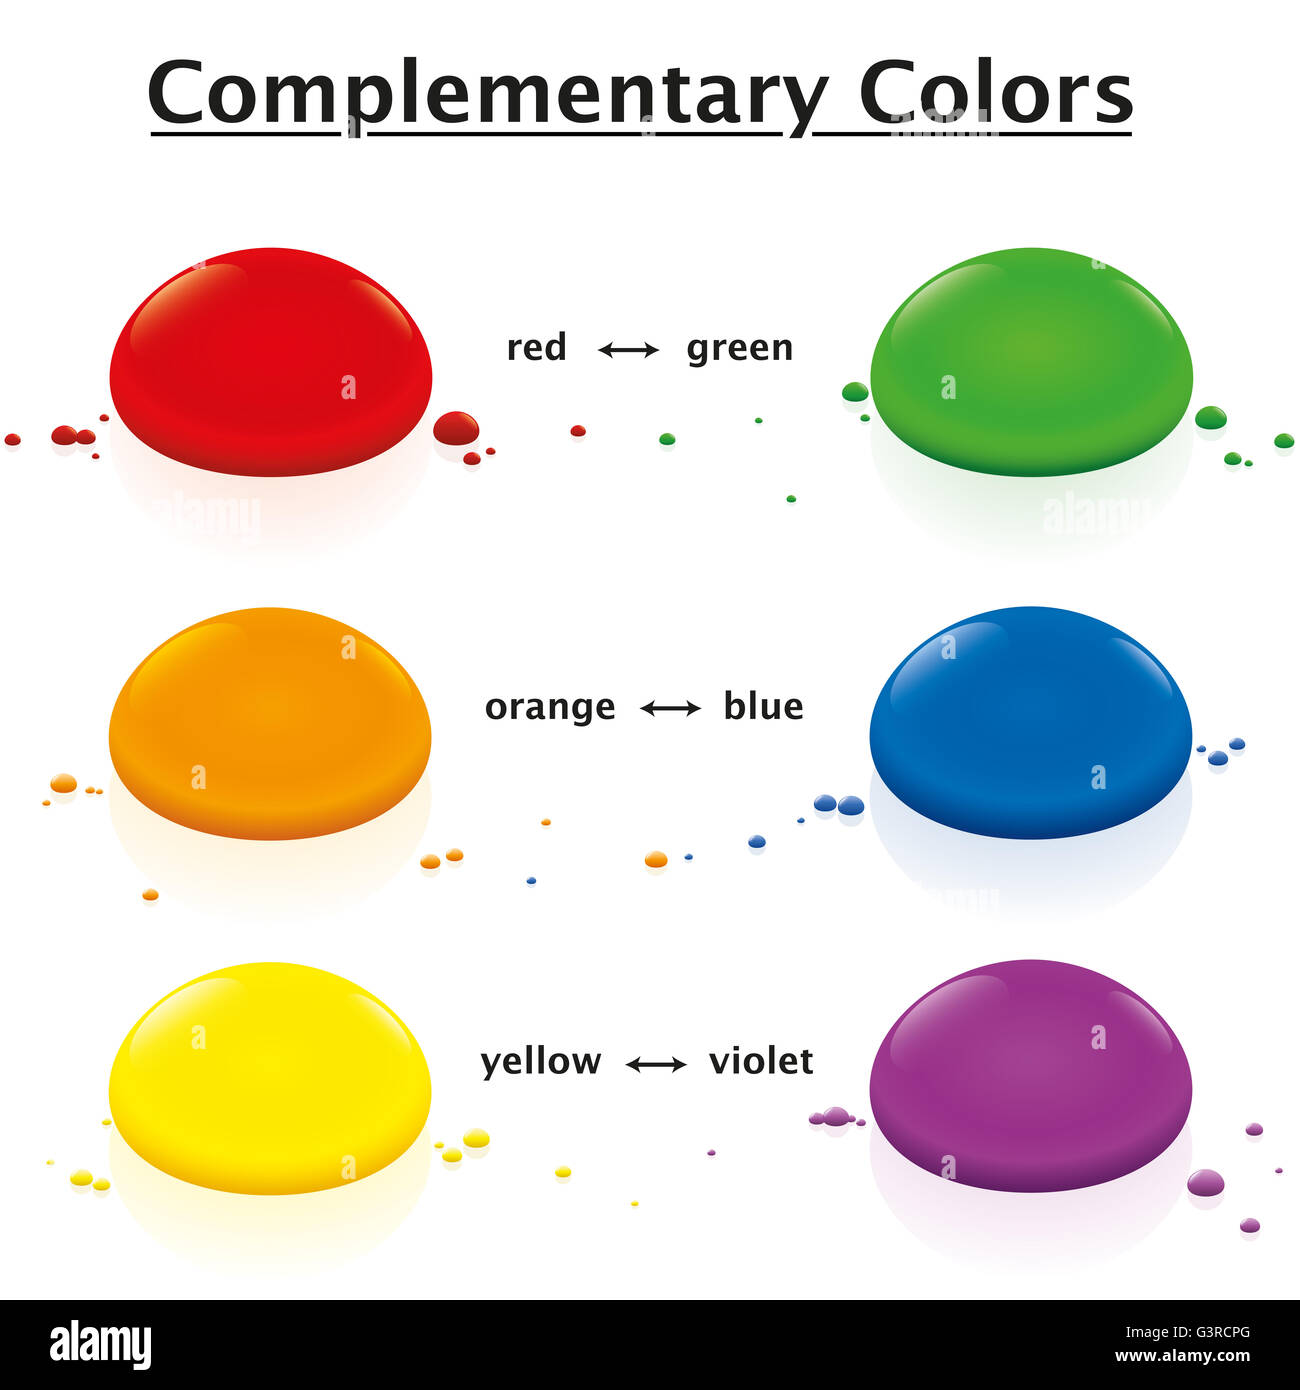 Opposite colors - red green, orange blue, yellow violet - complementary colored drops. Isolated vector illustration on white. Stock Photo